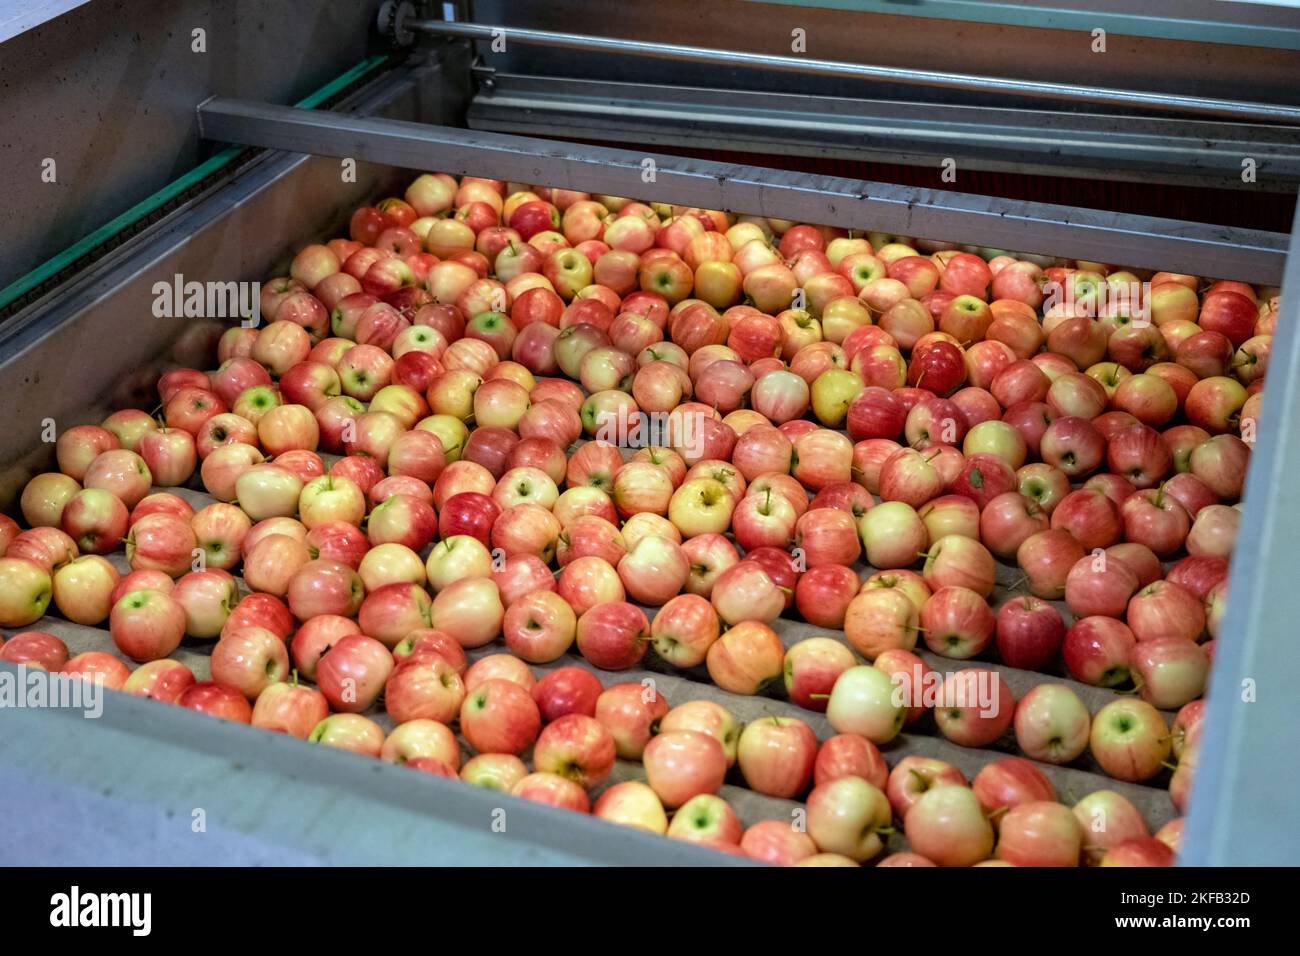 Food Processing Machinery For Post-harvest Handling Of Apples. Apples In Fresh Produce Distribution Centre. Stock Photo